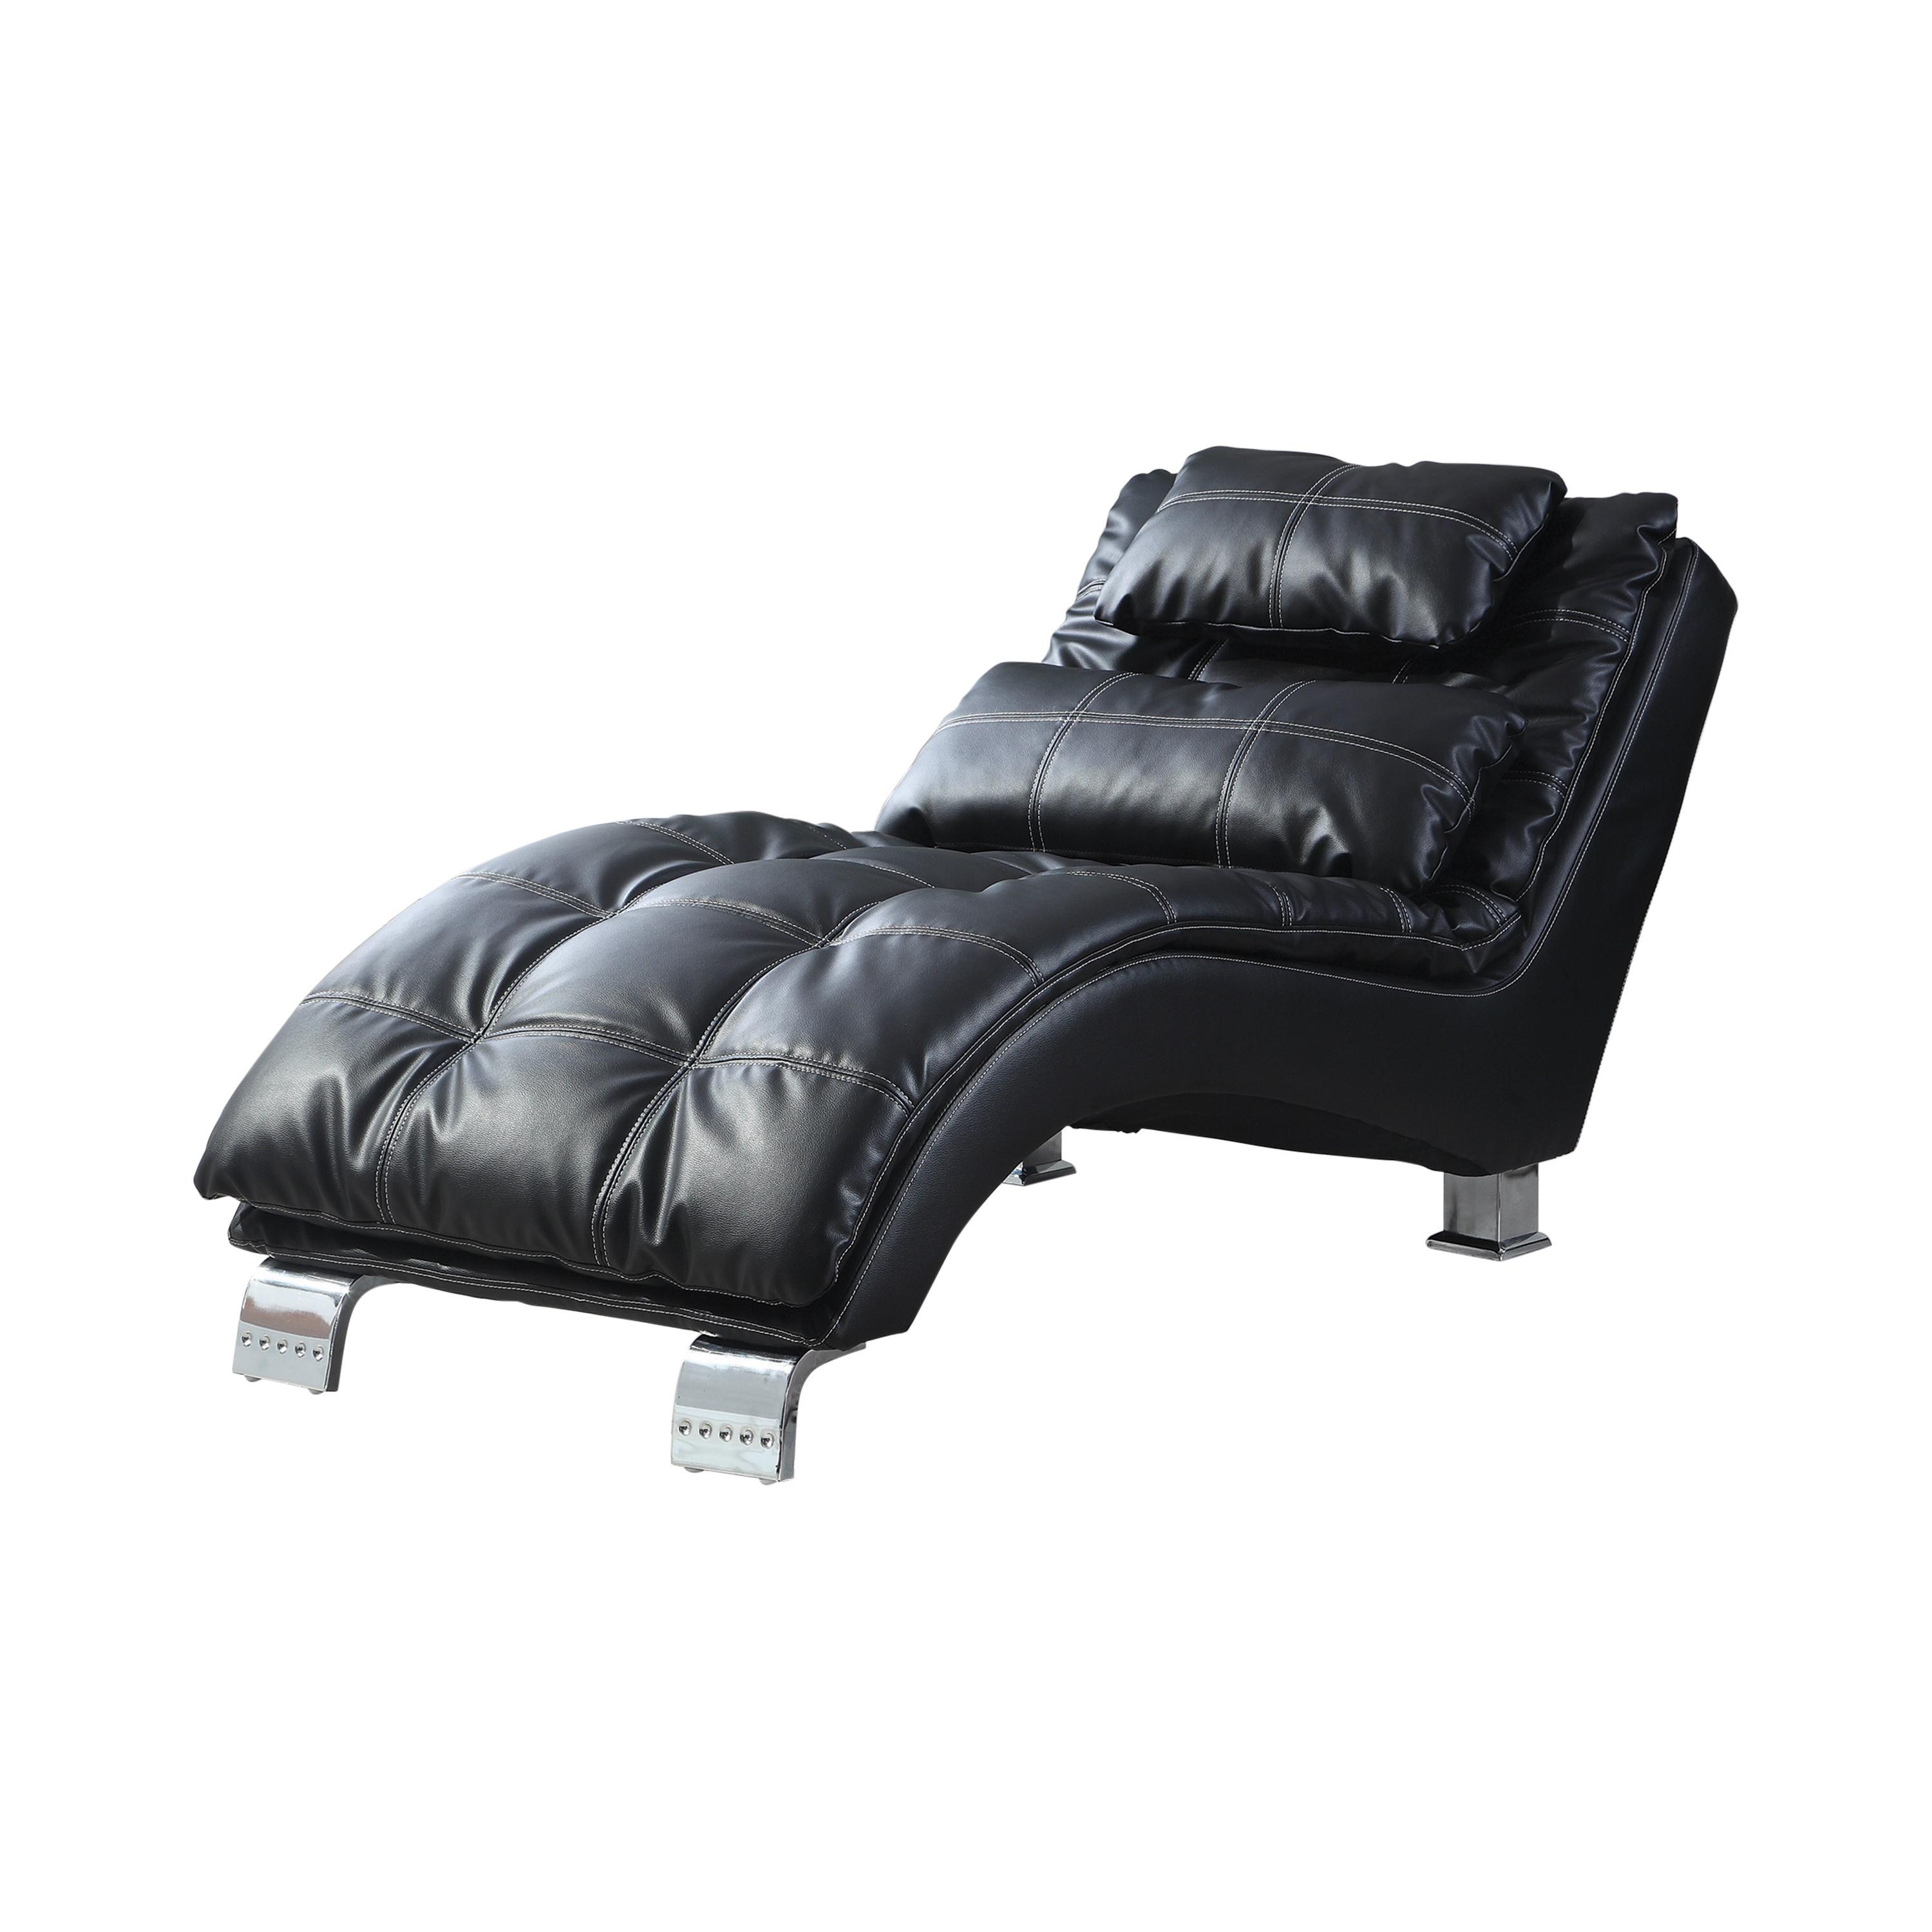 Modern Chaise 550075 Dilleston 550075 in Black Leatherette